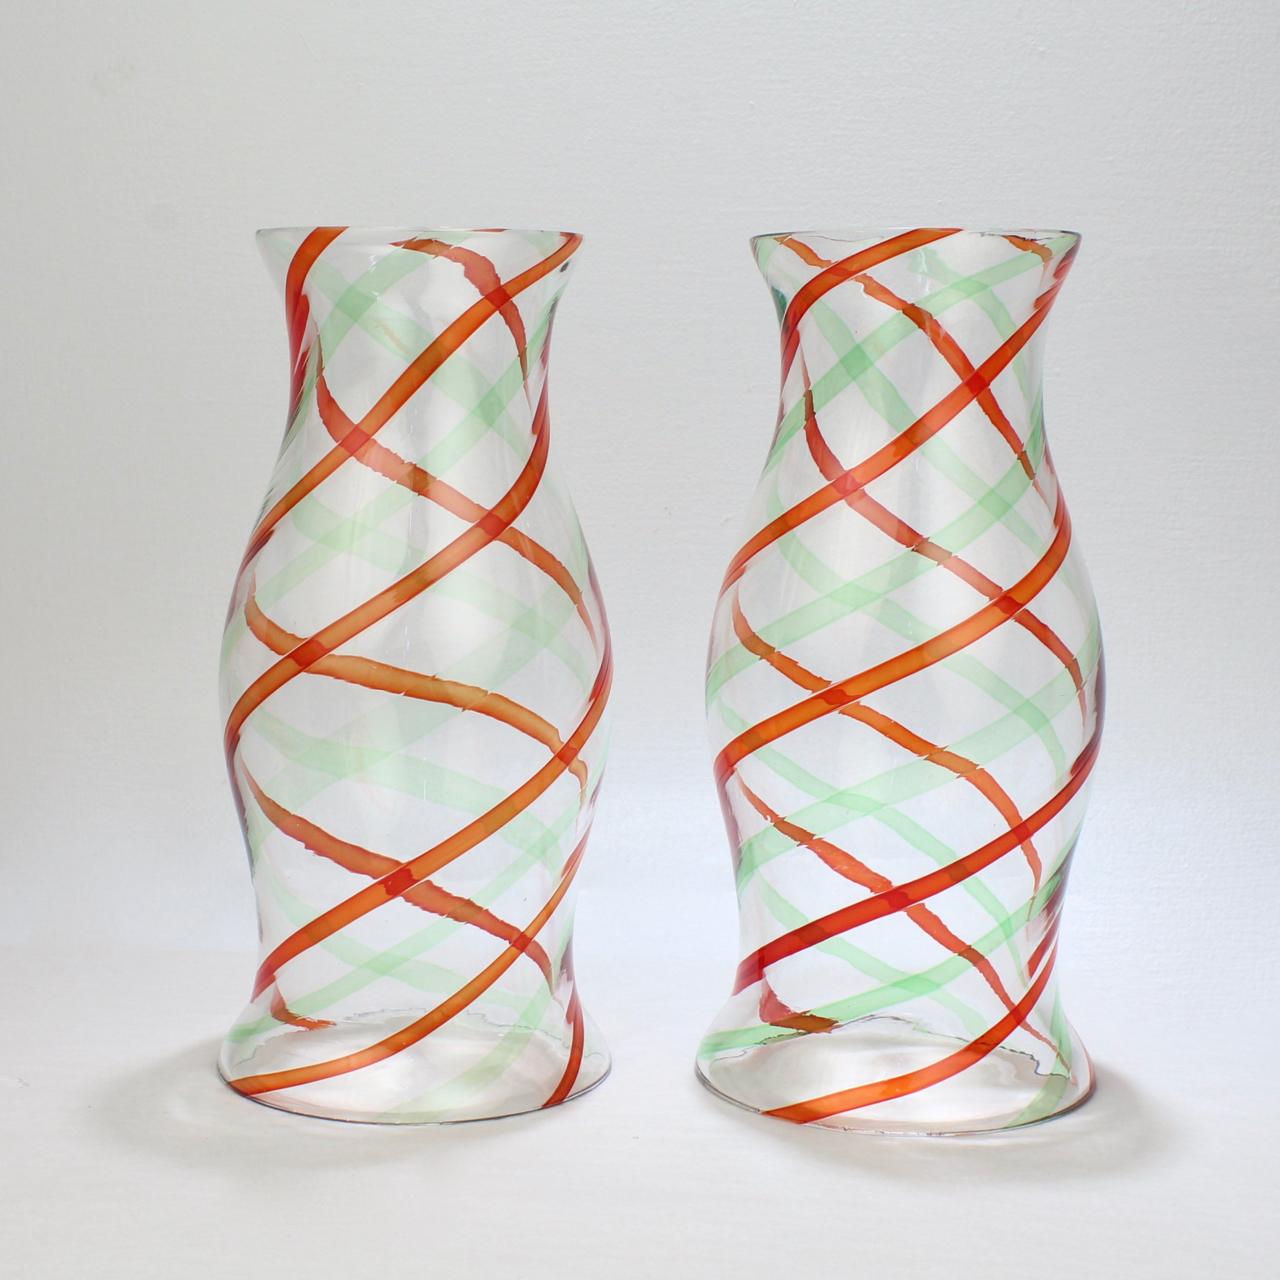 A pair of fine Italian art glass hurricane shades for candlesticks.

With 'fasce ritorte' twisted ribbon decoration in green and red on a clear ground. 

In the style of Fulvio Bianconi and Venini.

Simply a great pair of Venetian hurricane